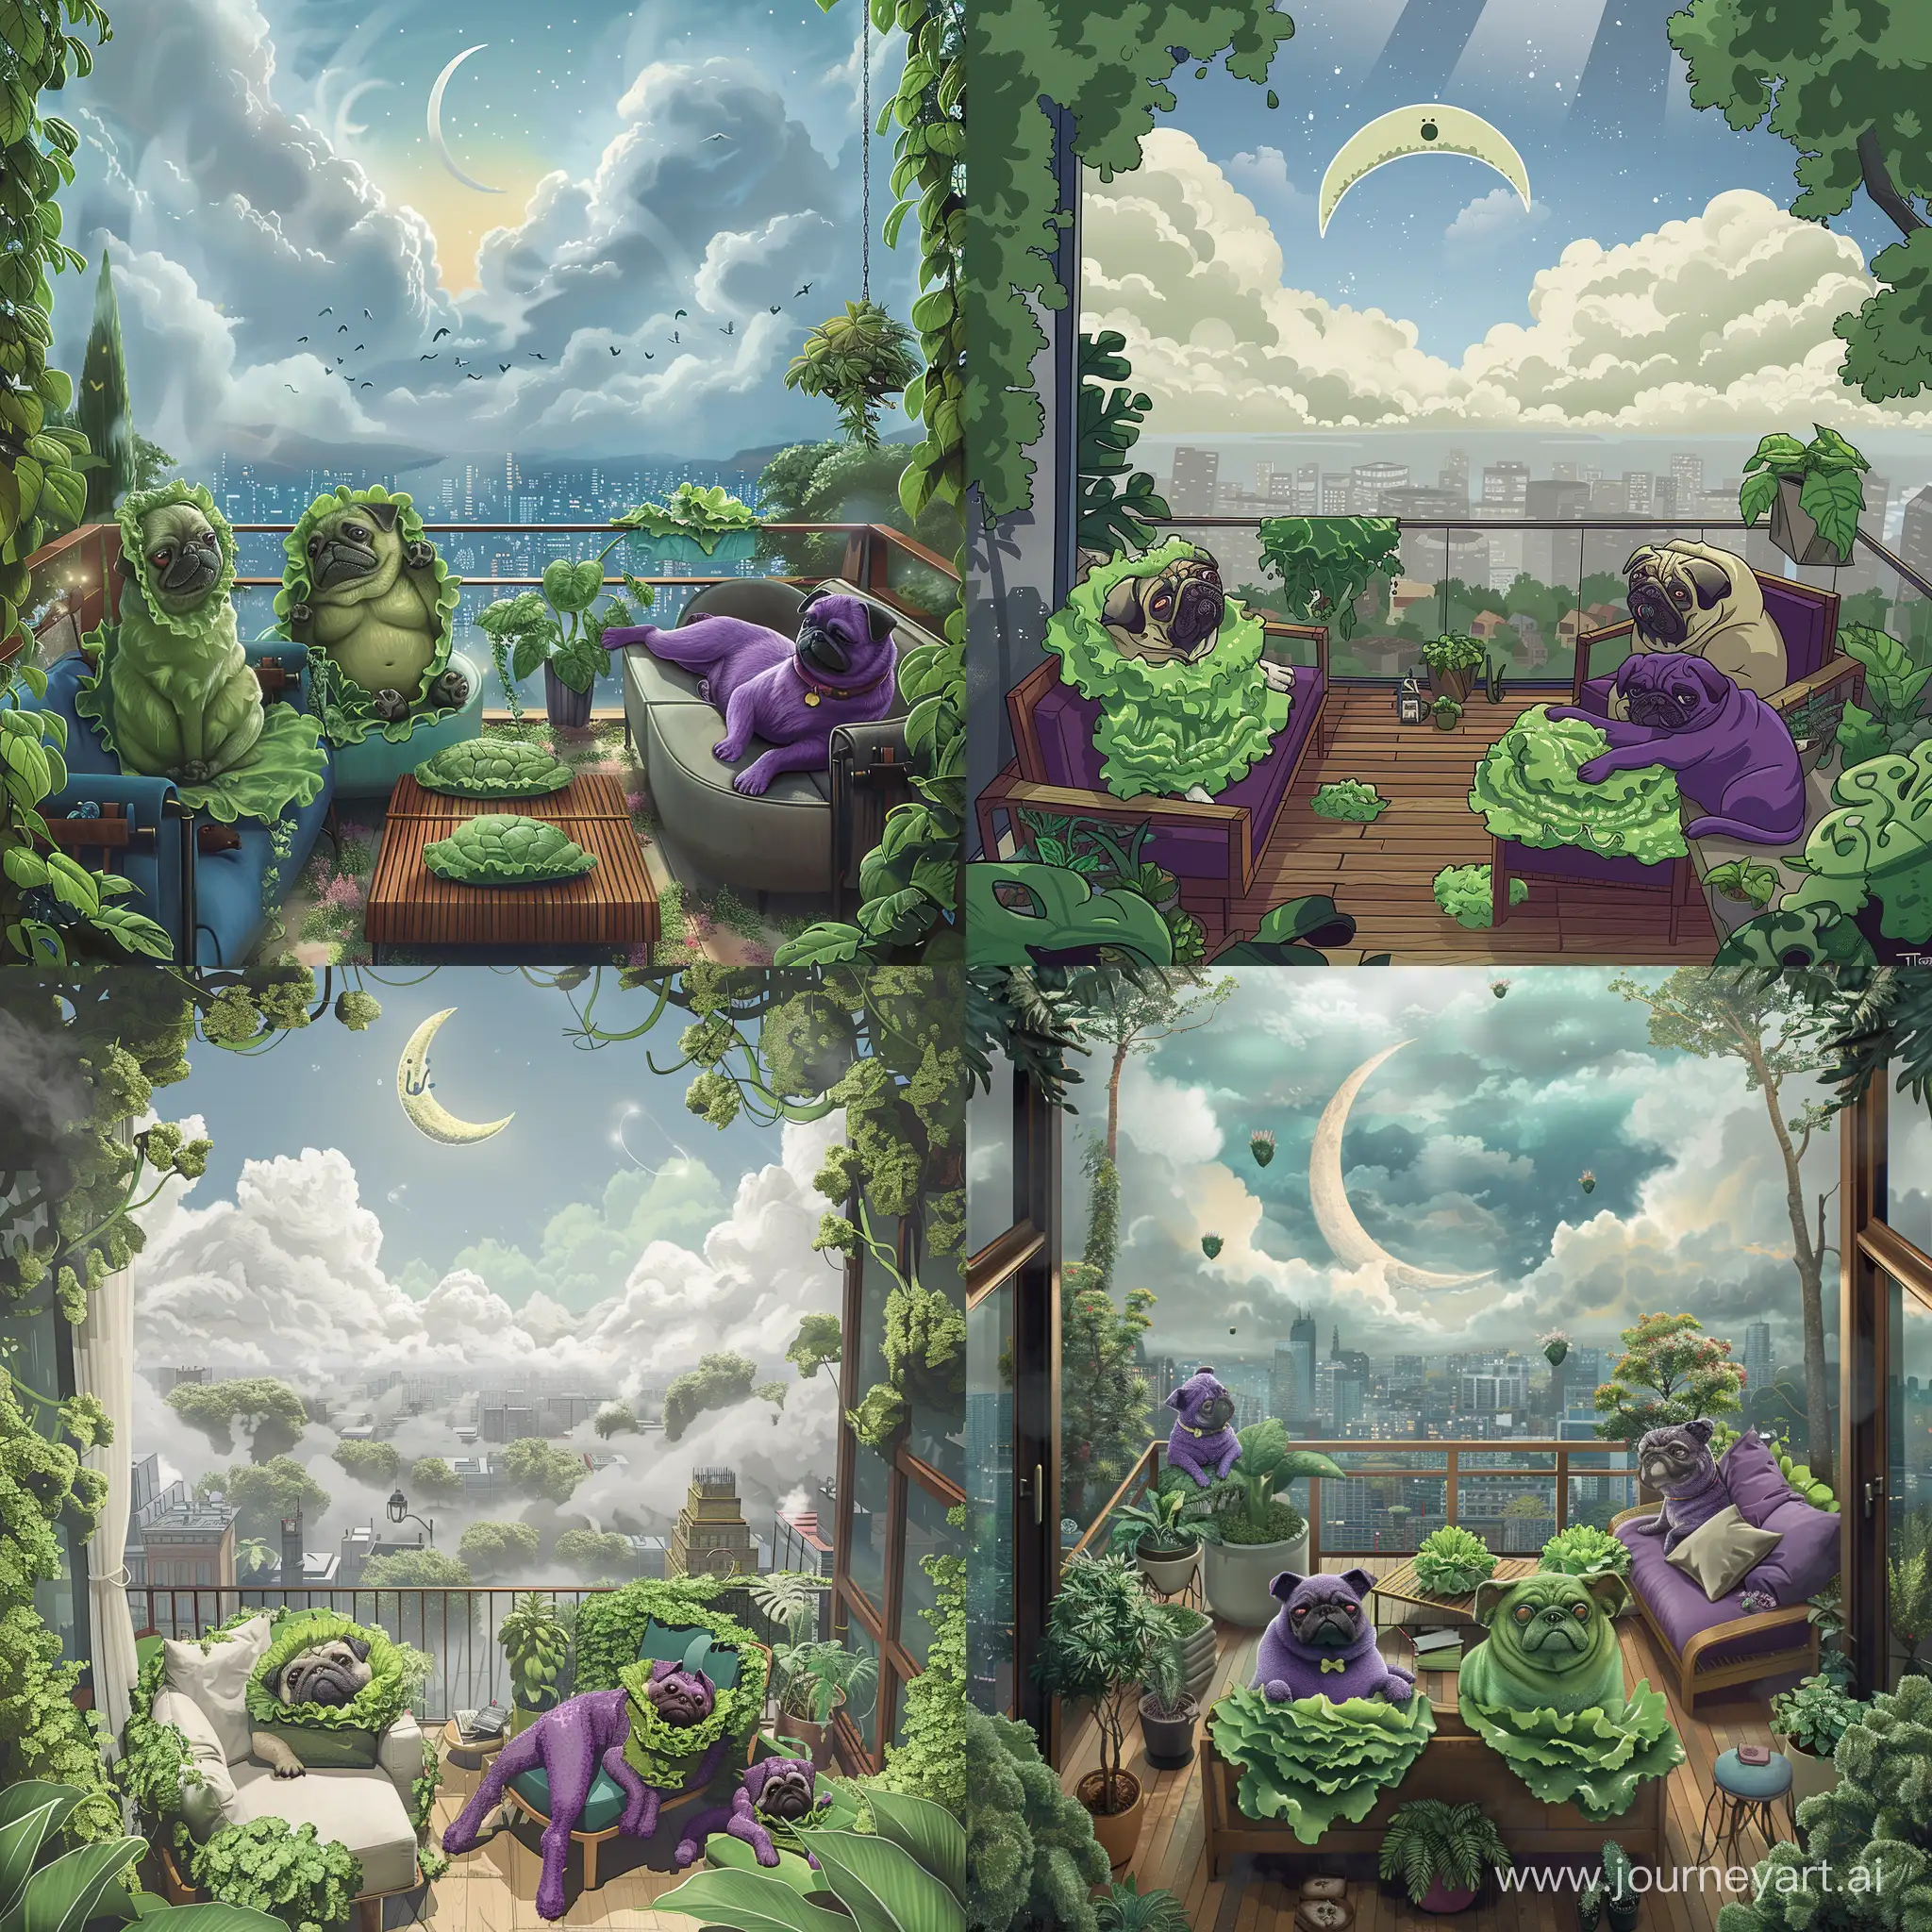 grumpy green lettuce pug dogs with purple brussels griffon dogs on a large balcony viewed from above, misty city with fluffy clouds and trees in the background frame a crescent moon with a face, illustration, plants  cover the modern patio furniture, dogs sit on the furniture, one dog reclining on a couch